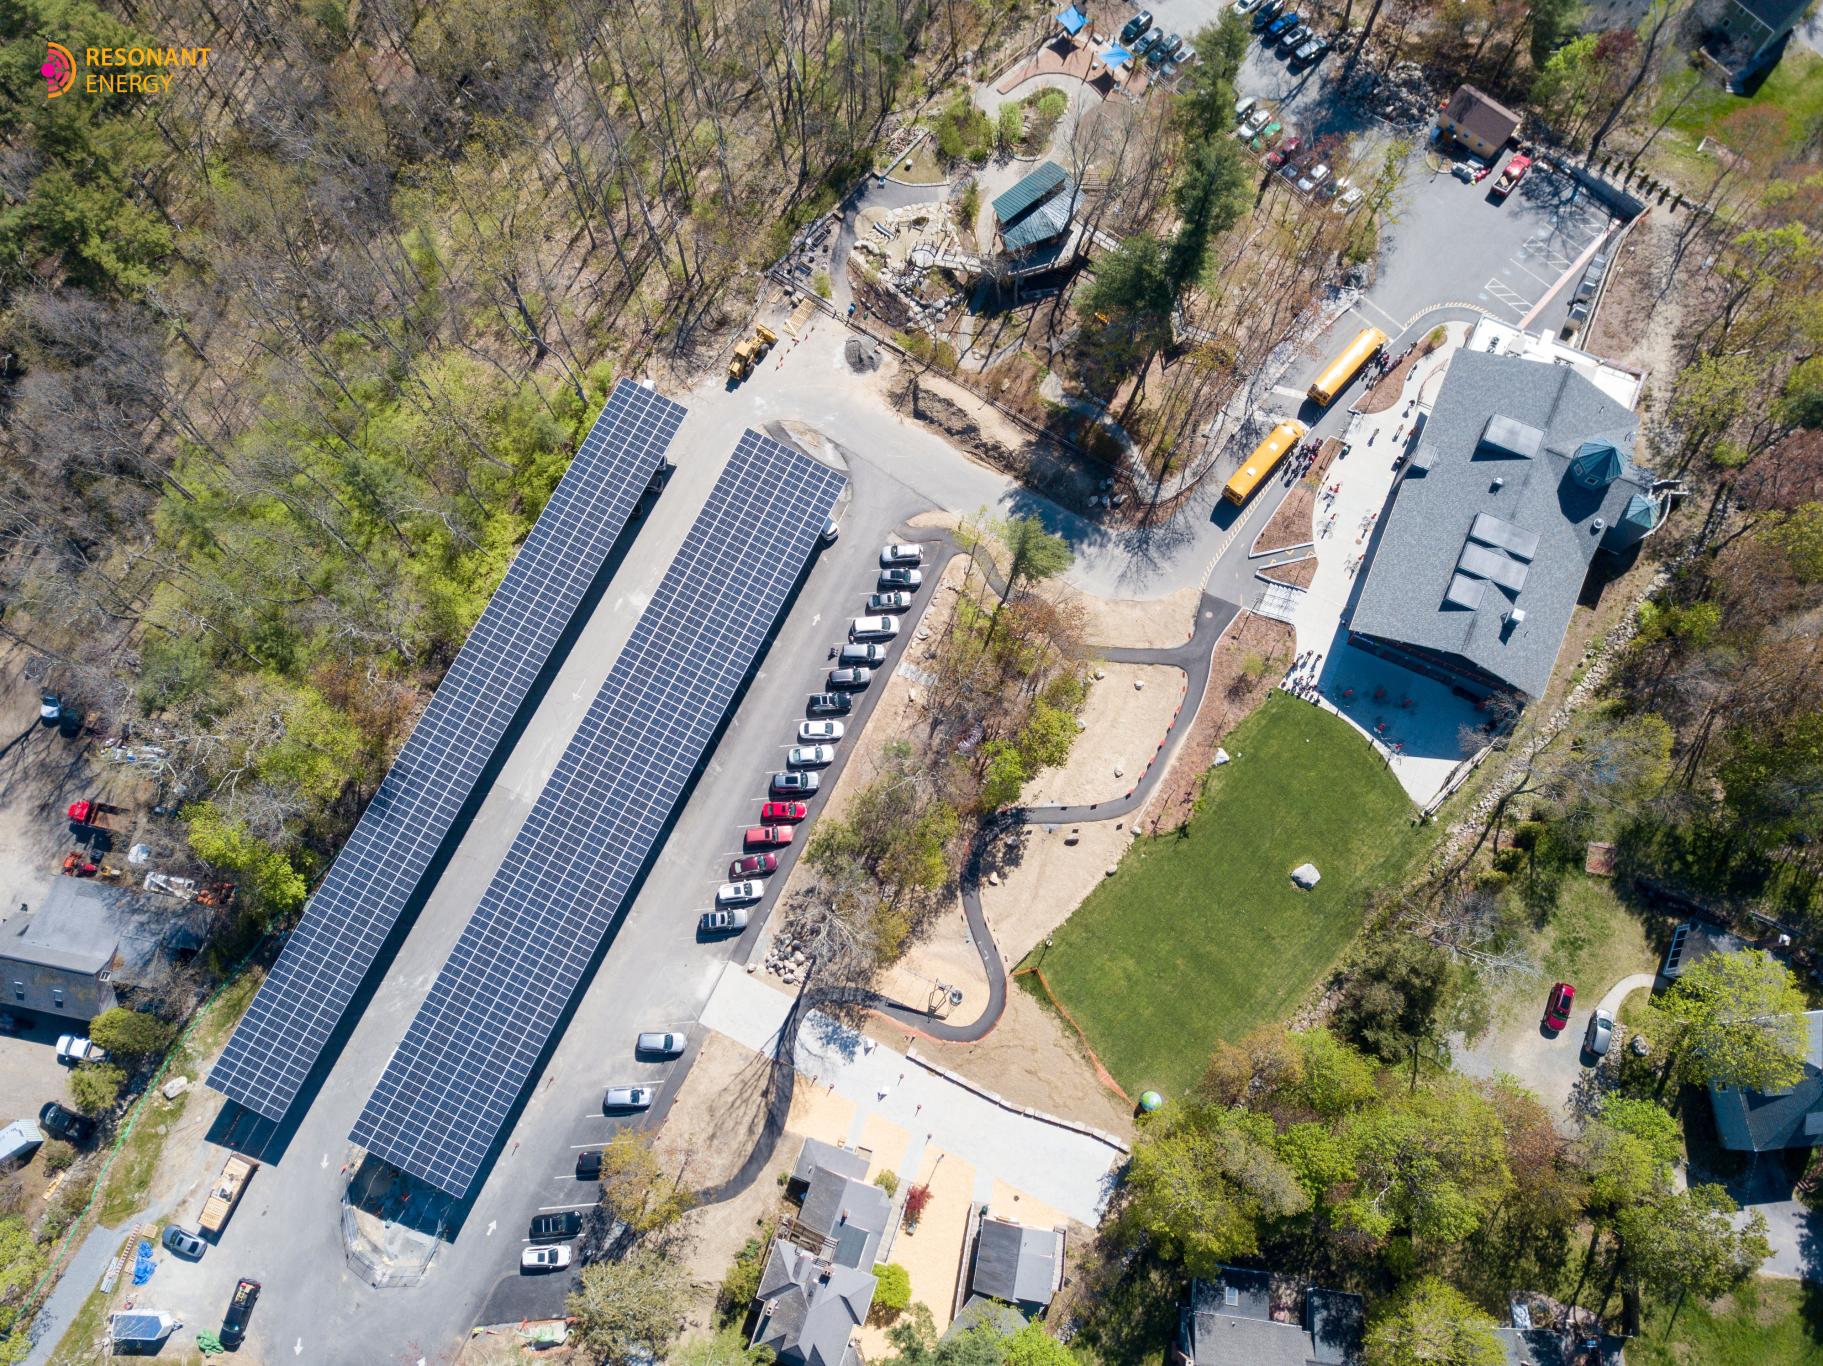 aerial view of Discovery Museum campus with two full rows of solar arrays on covered parking